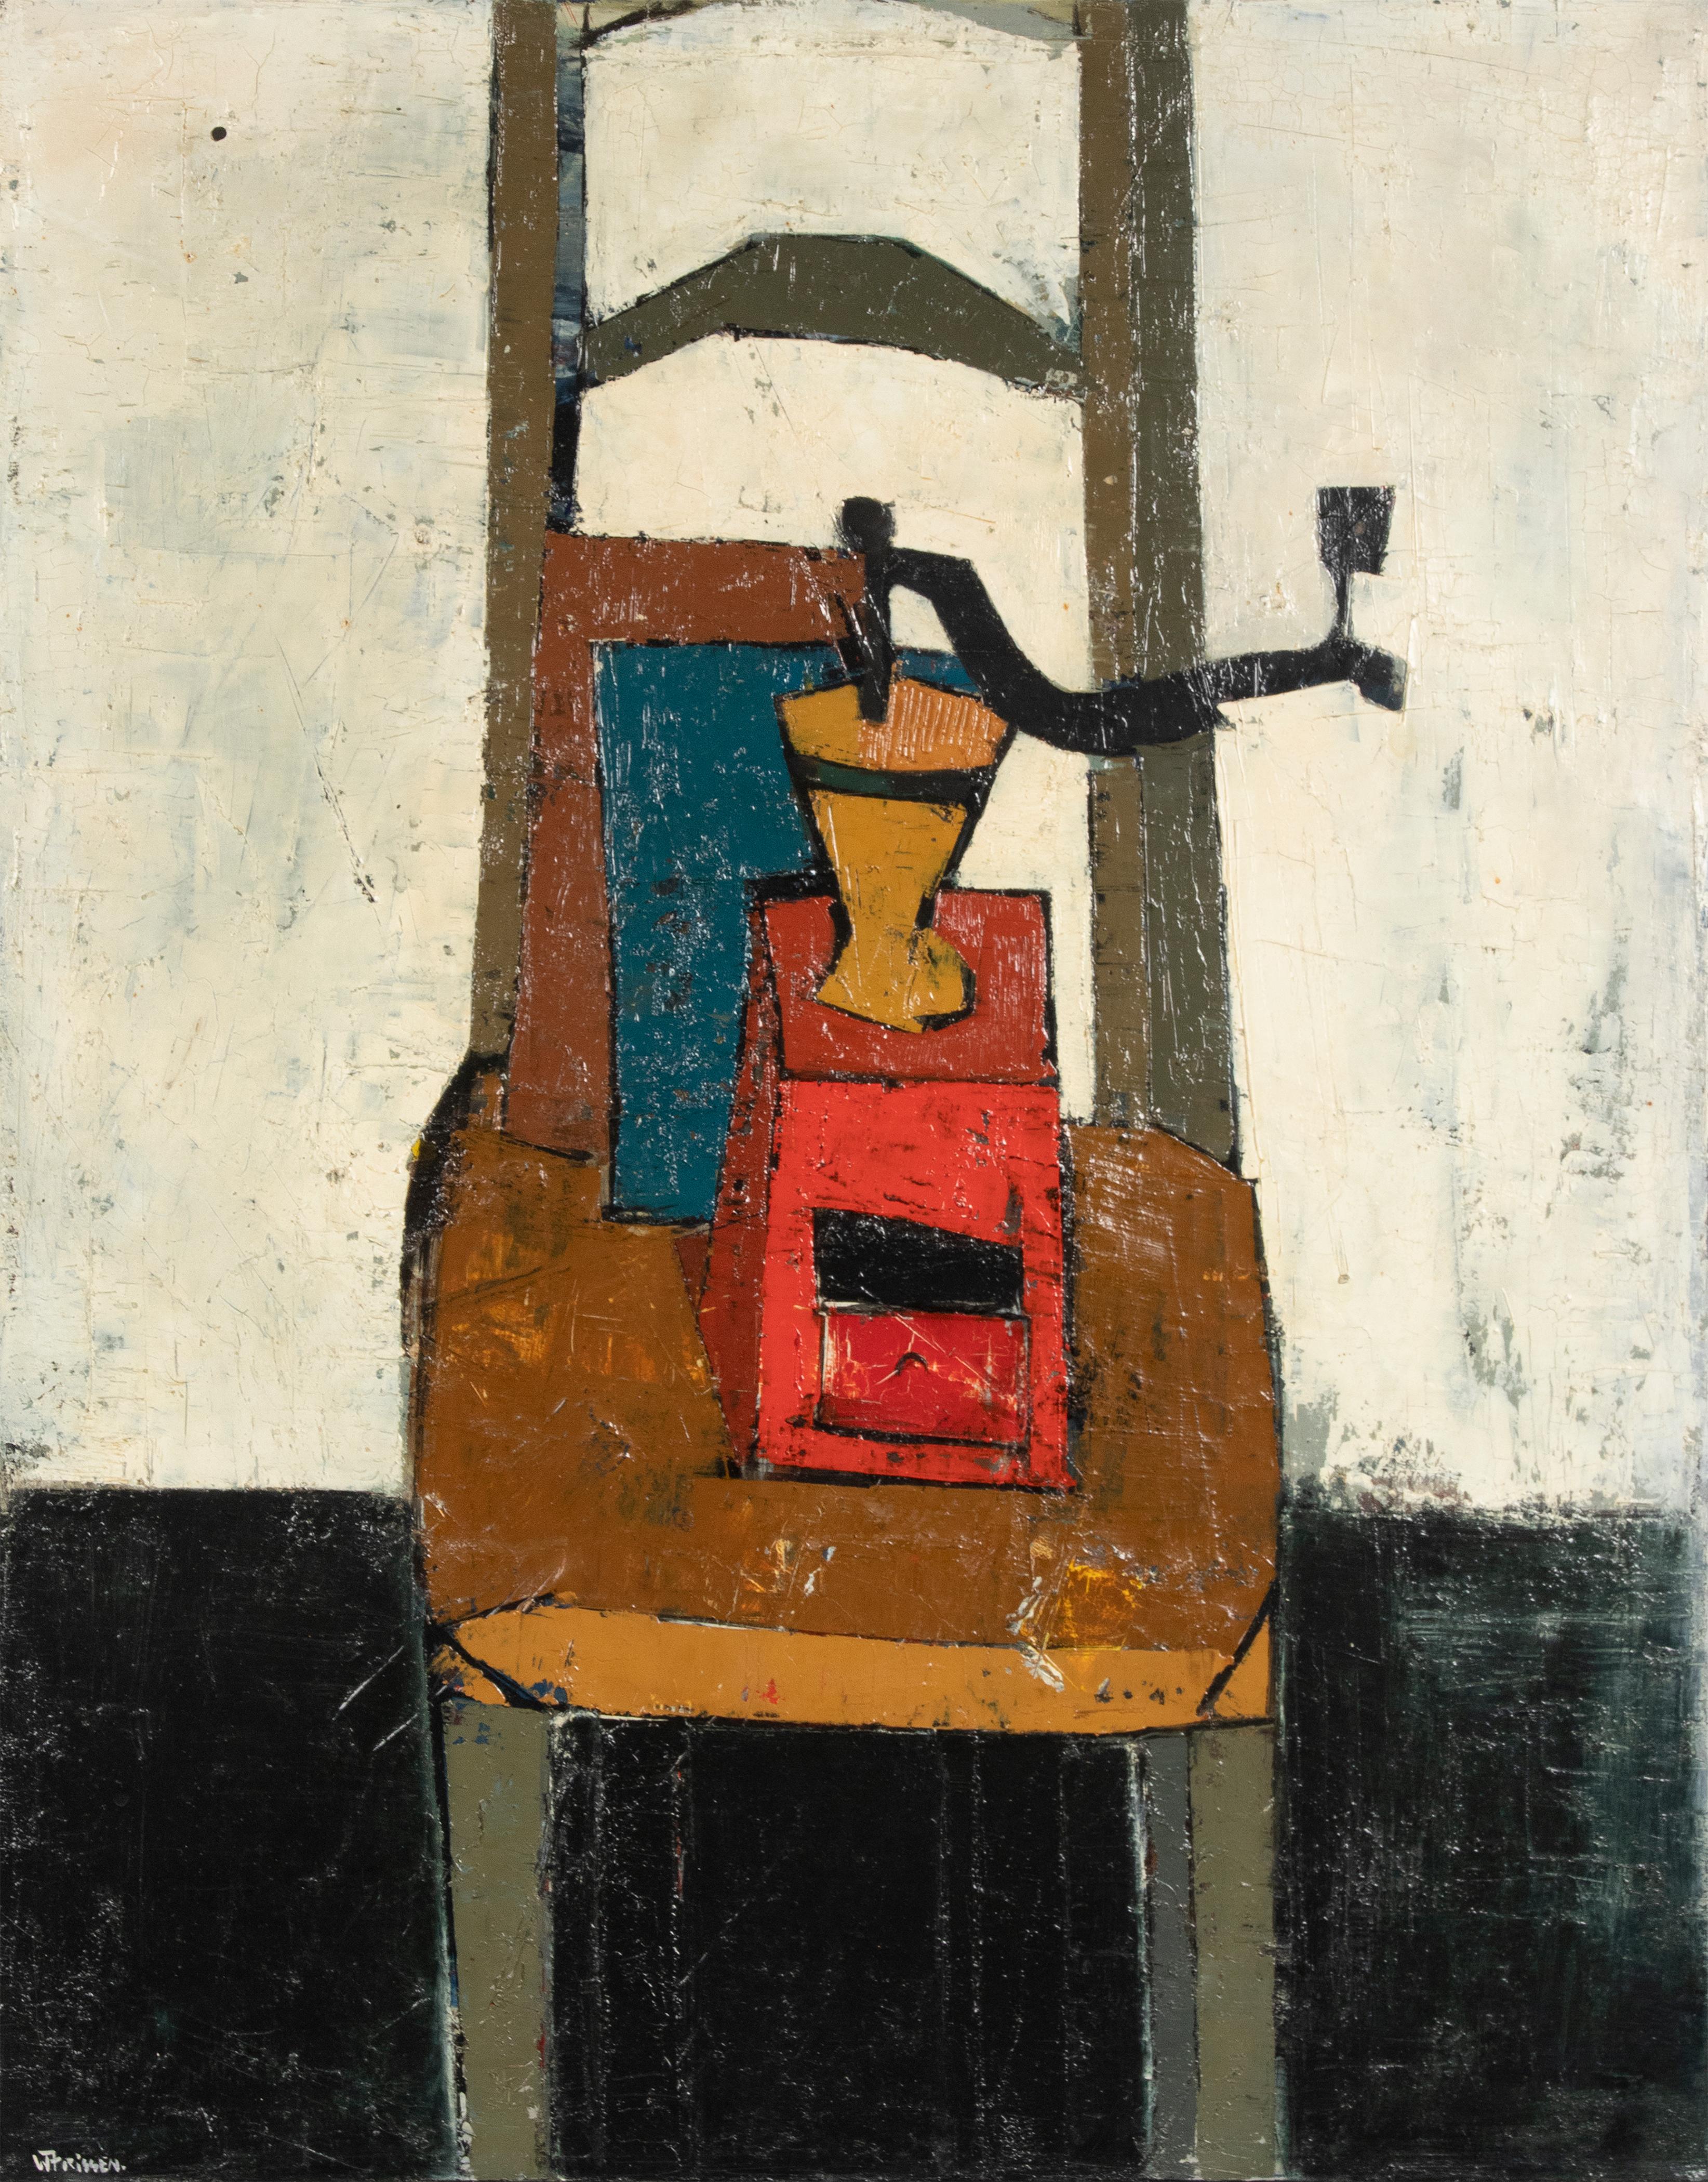 Charming Mid-Century Modern painting by the Belgian artist Willy Frissen. It is a still life with a chair and a coffee grinder against a light background. It's oil paint on canvas. The painting is framed in a simple black wooden frame. The painting